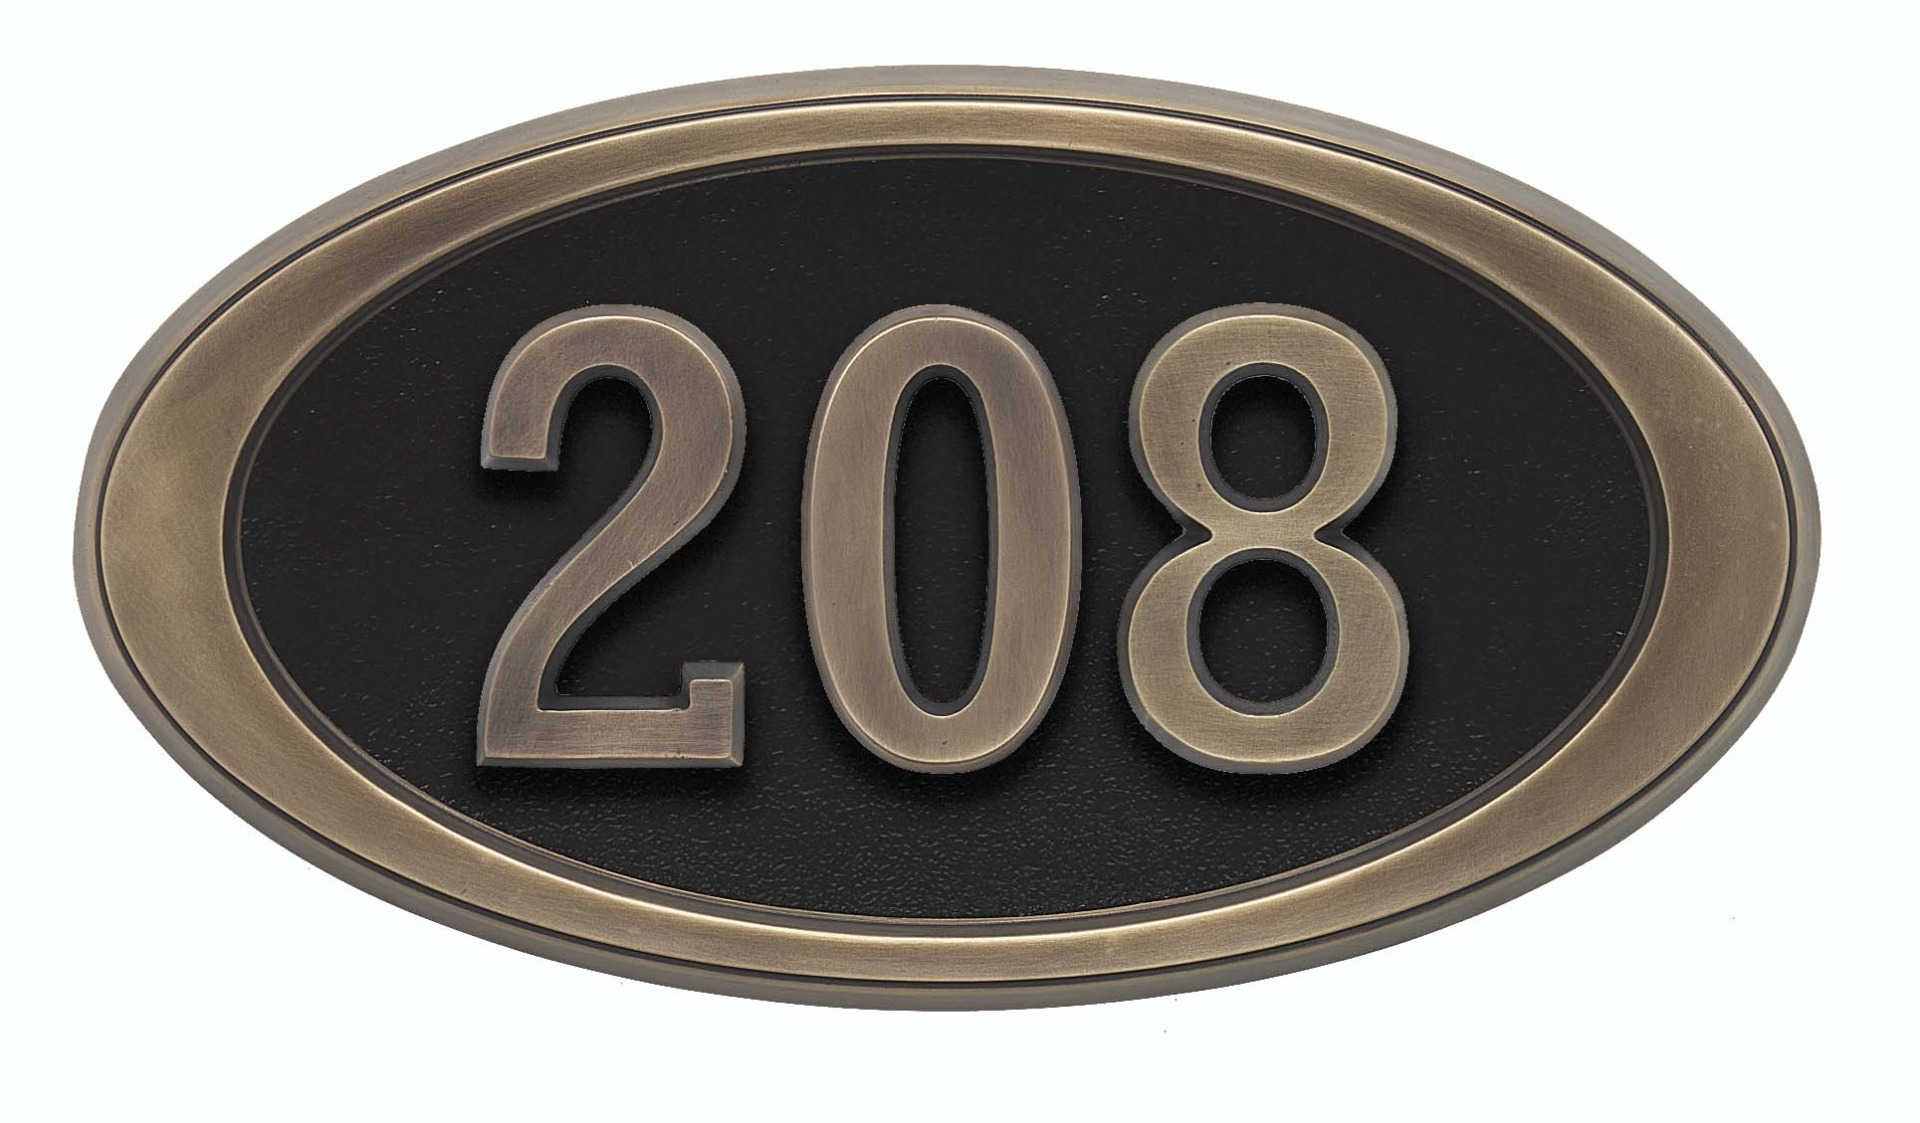 Housemark Small Oval Address Plaques with Trim Color